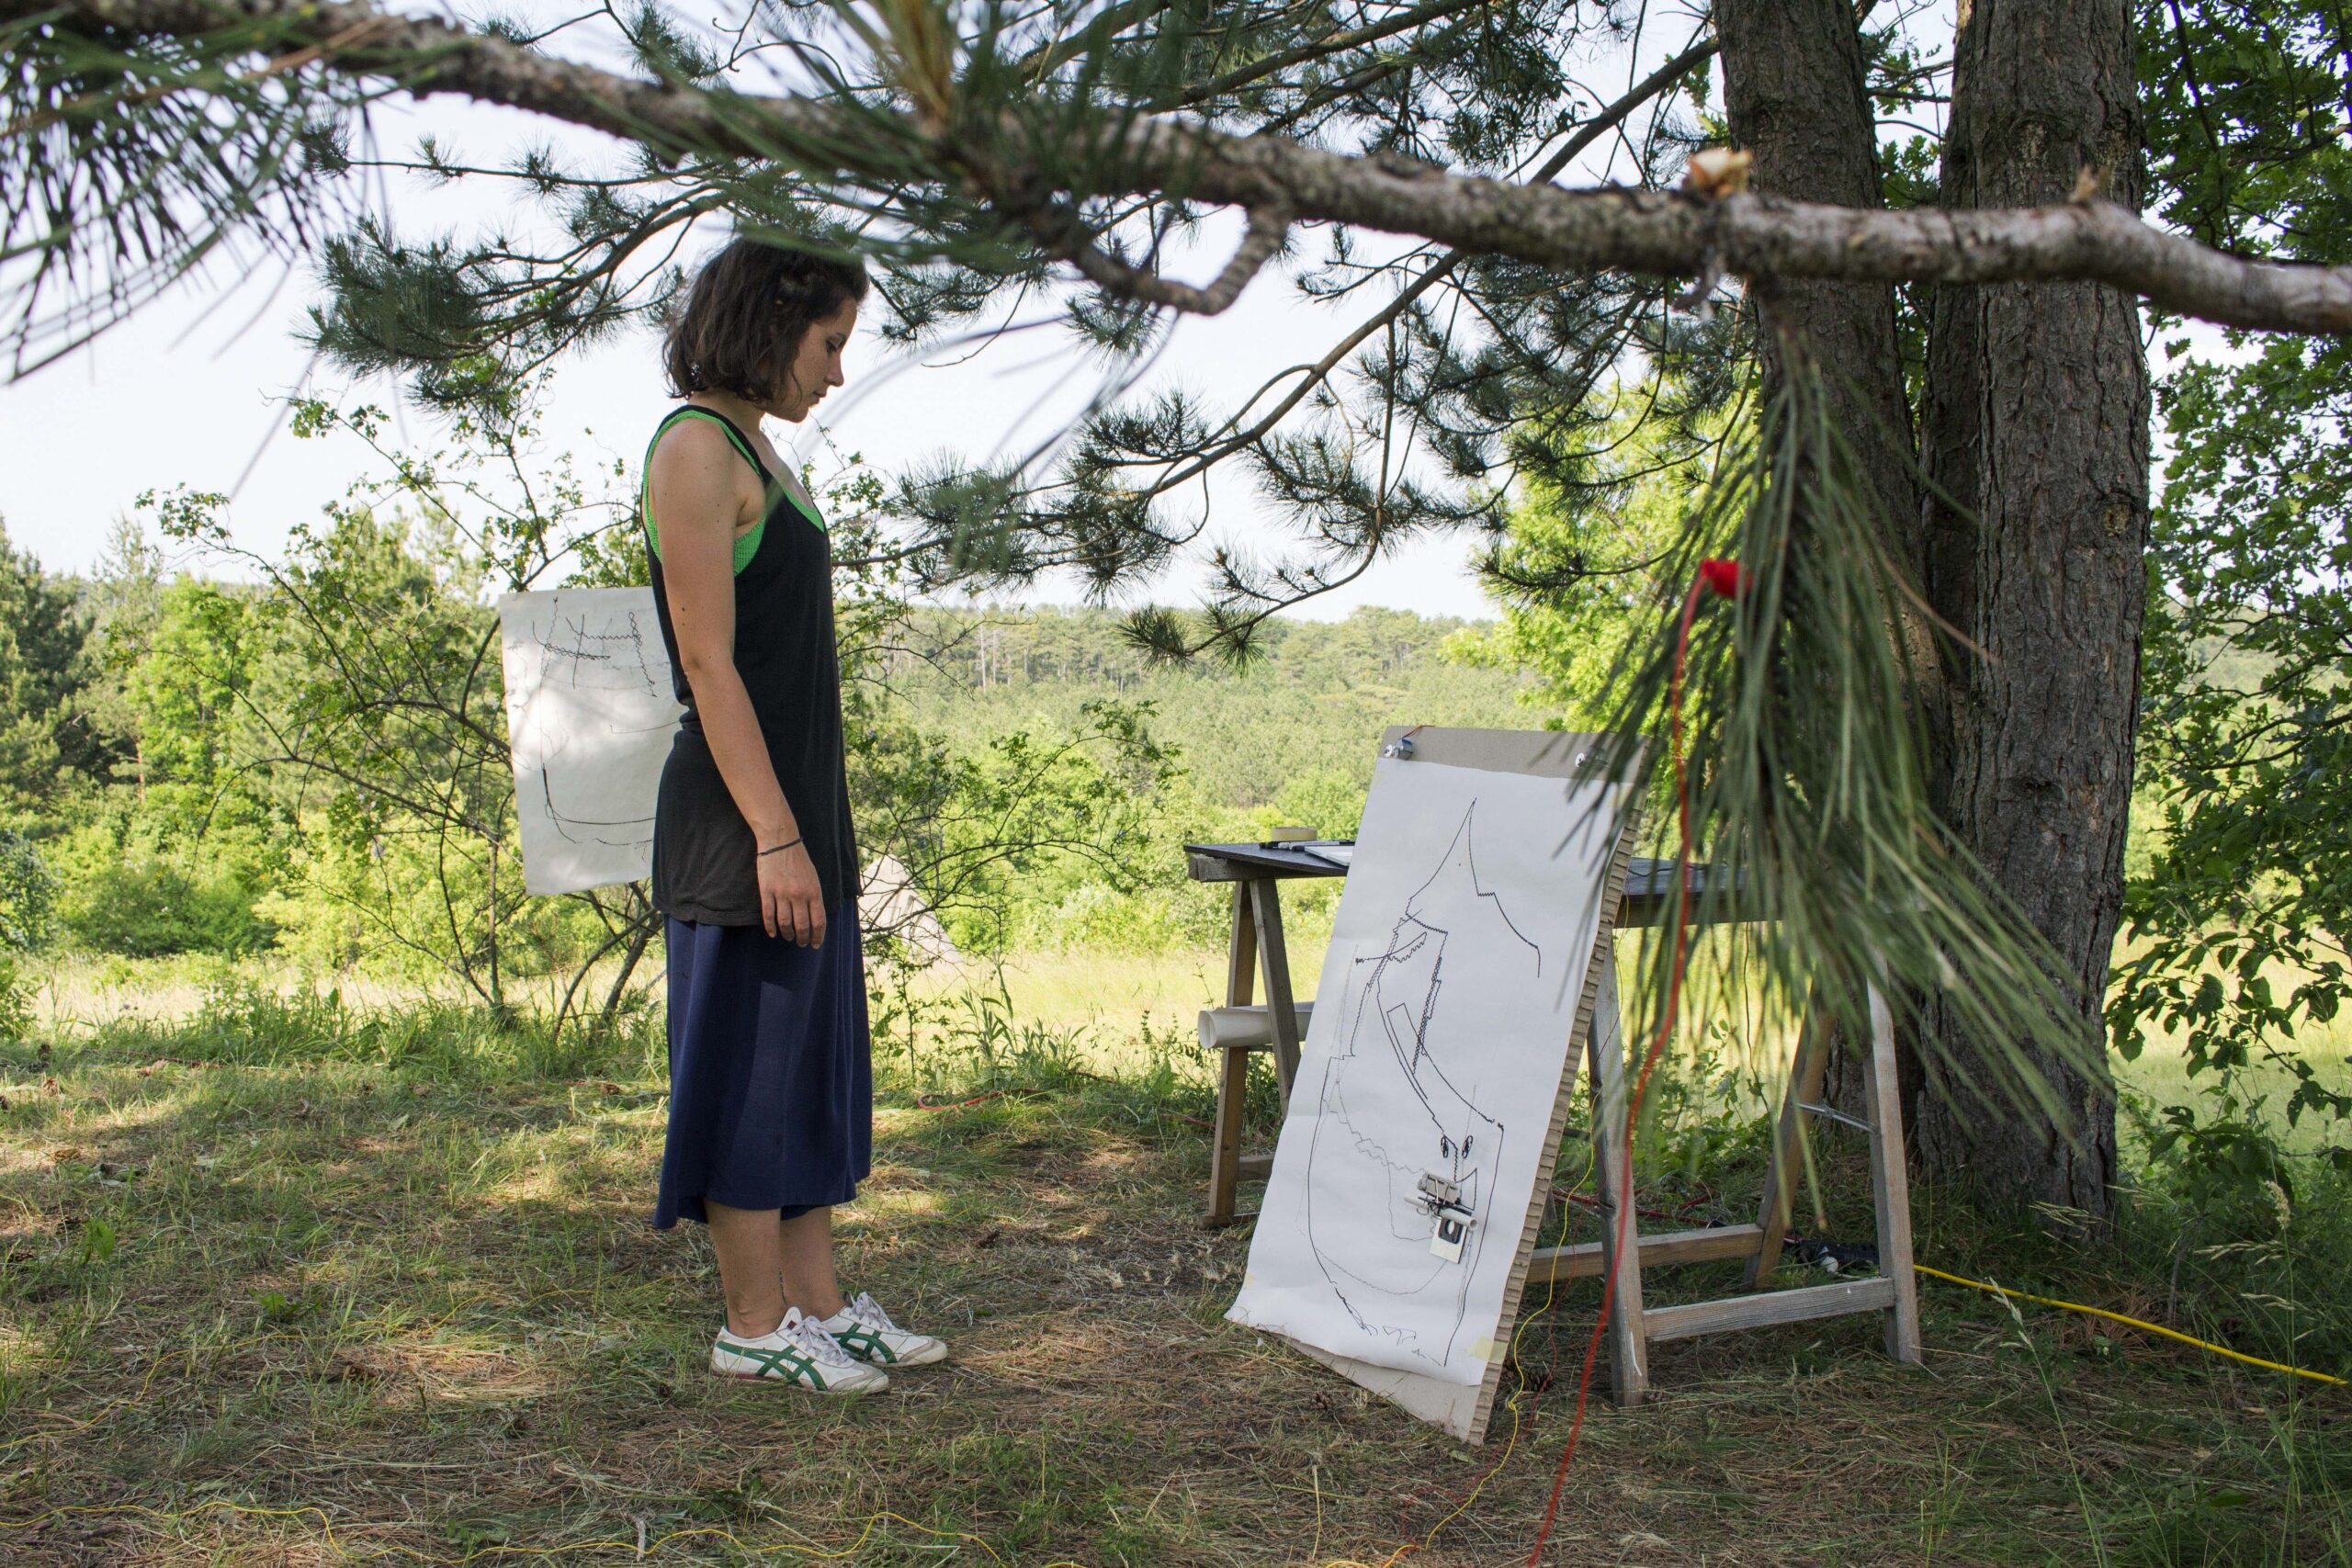 erika glionna looking at duet canvas in the wood